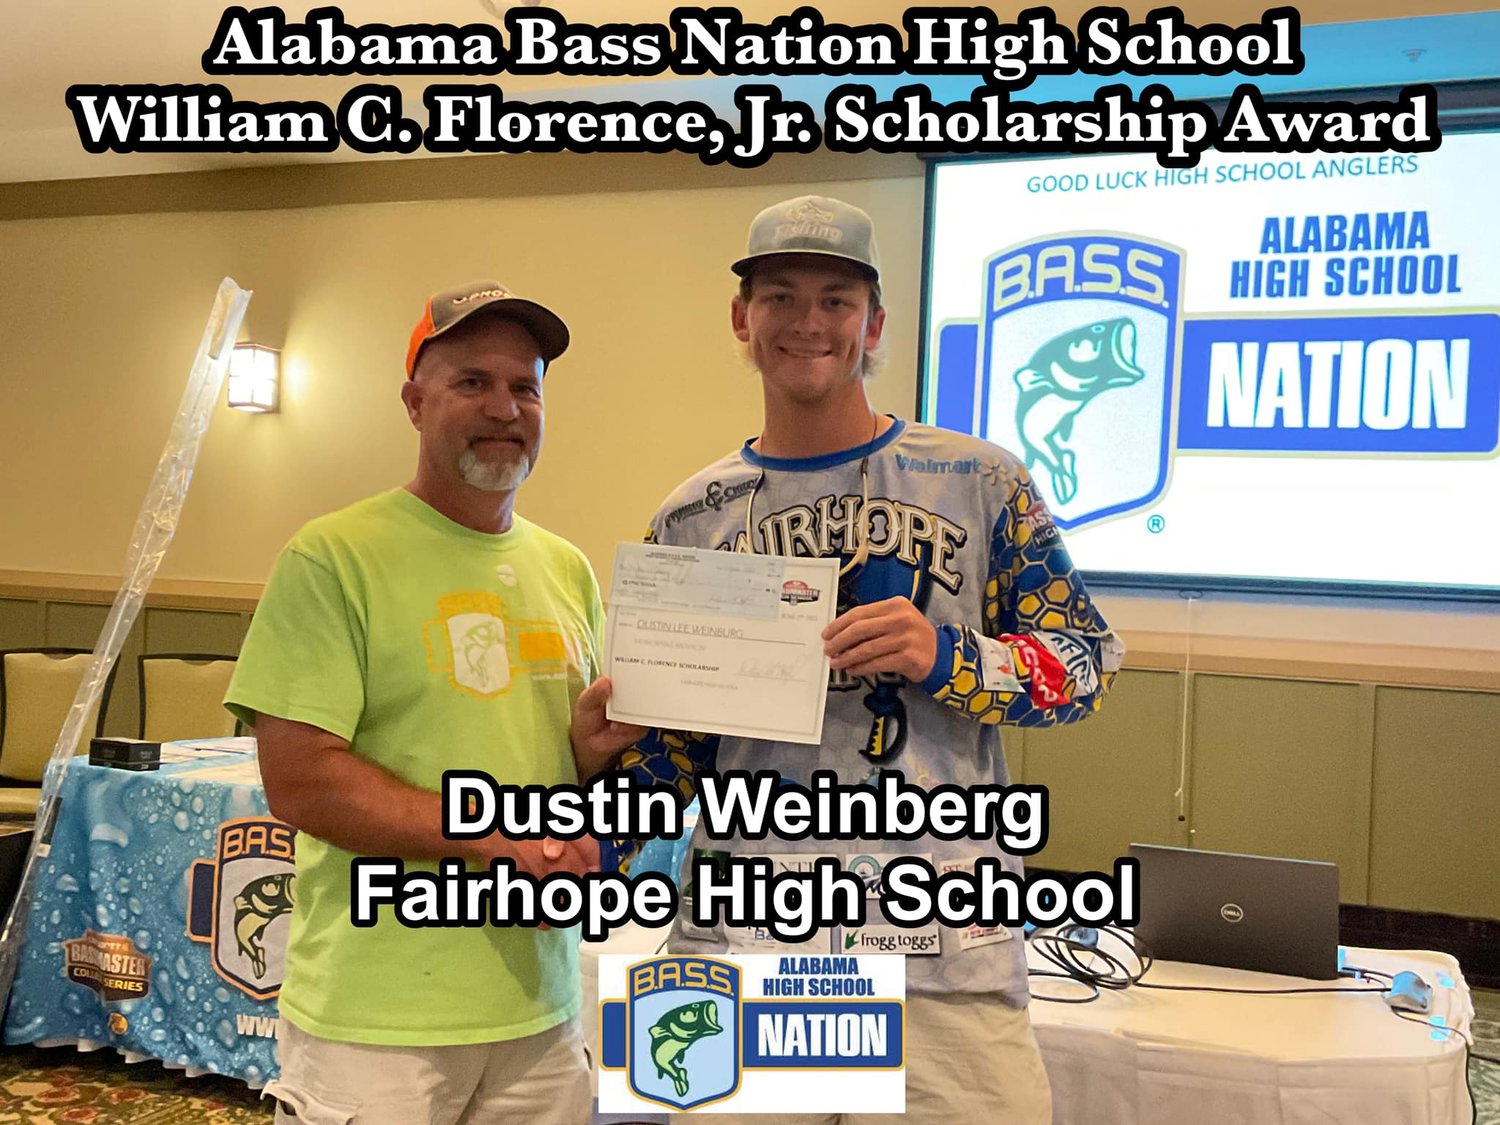 Fairhope’s Dustin Weinberg was presented a William C. Florence Jr. Scholarship Award at the Alabama Bass Nation High School State Championship last weekend.